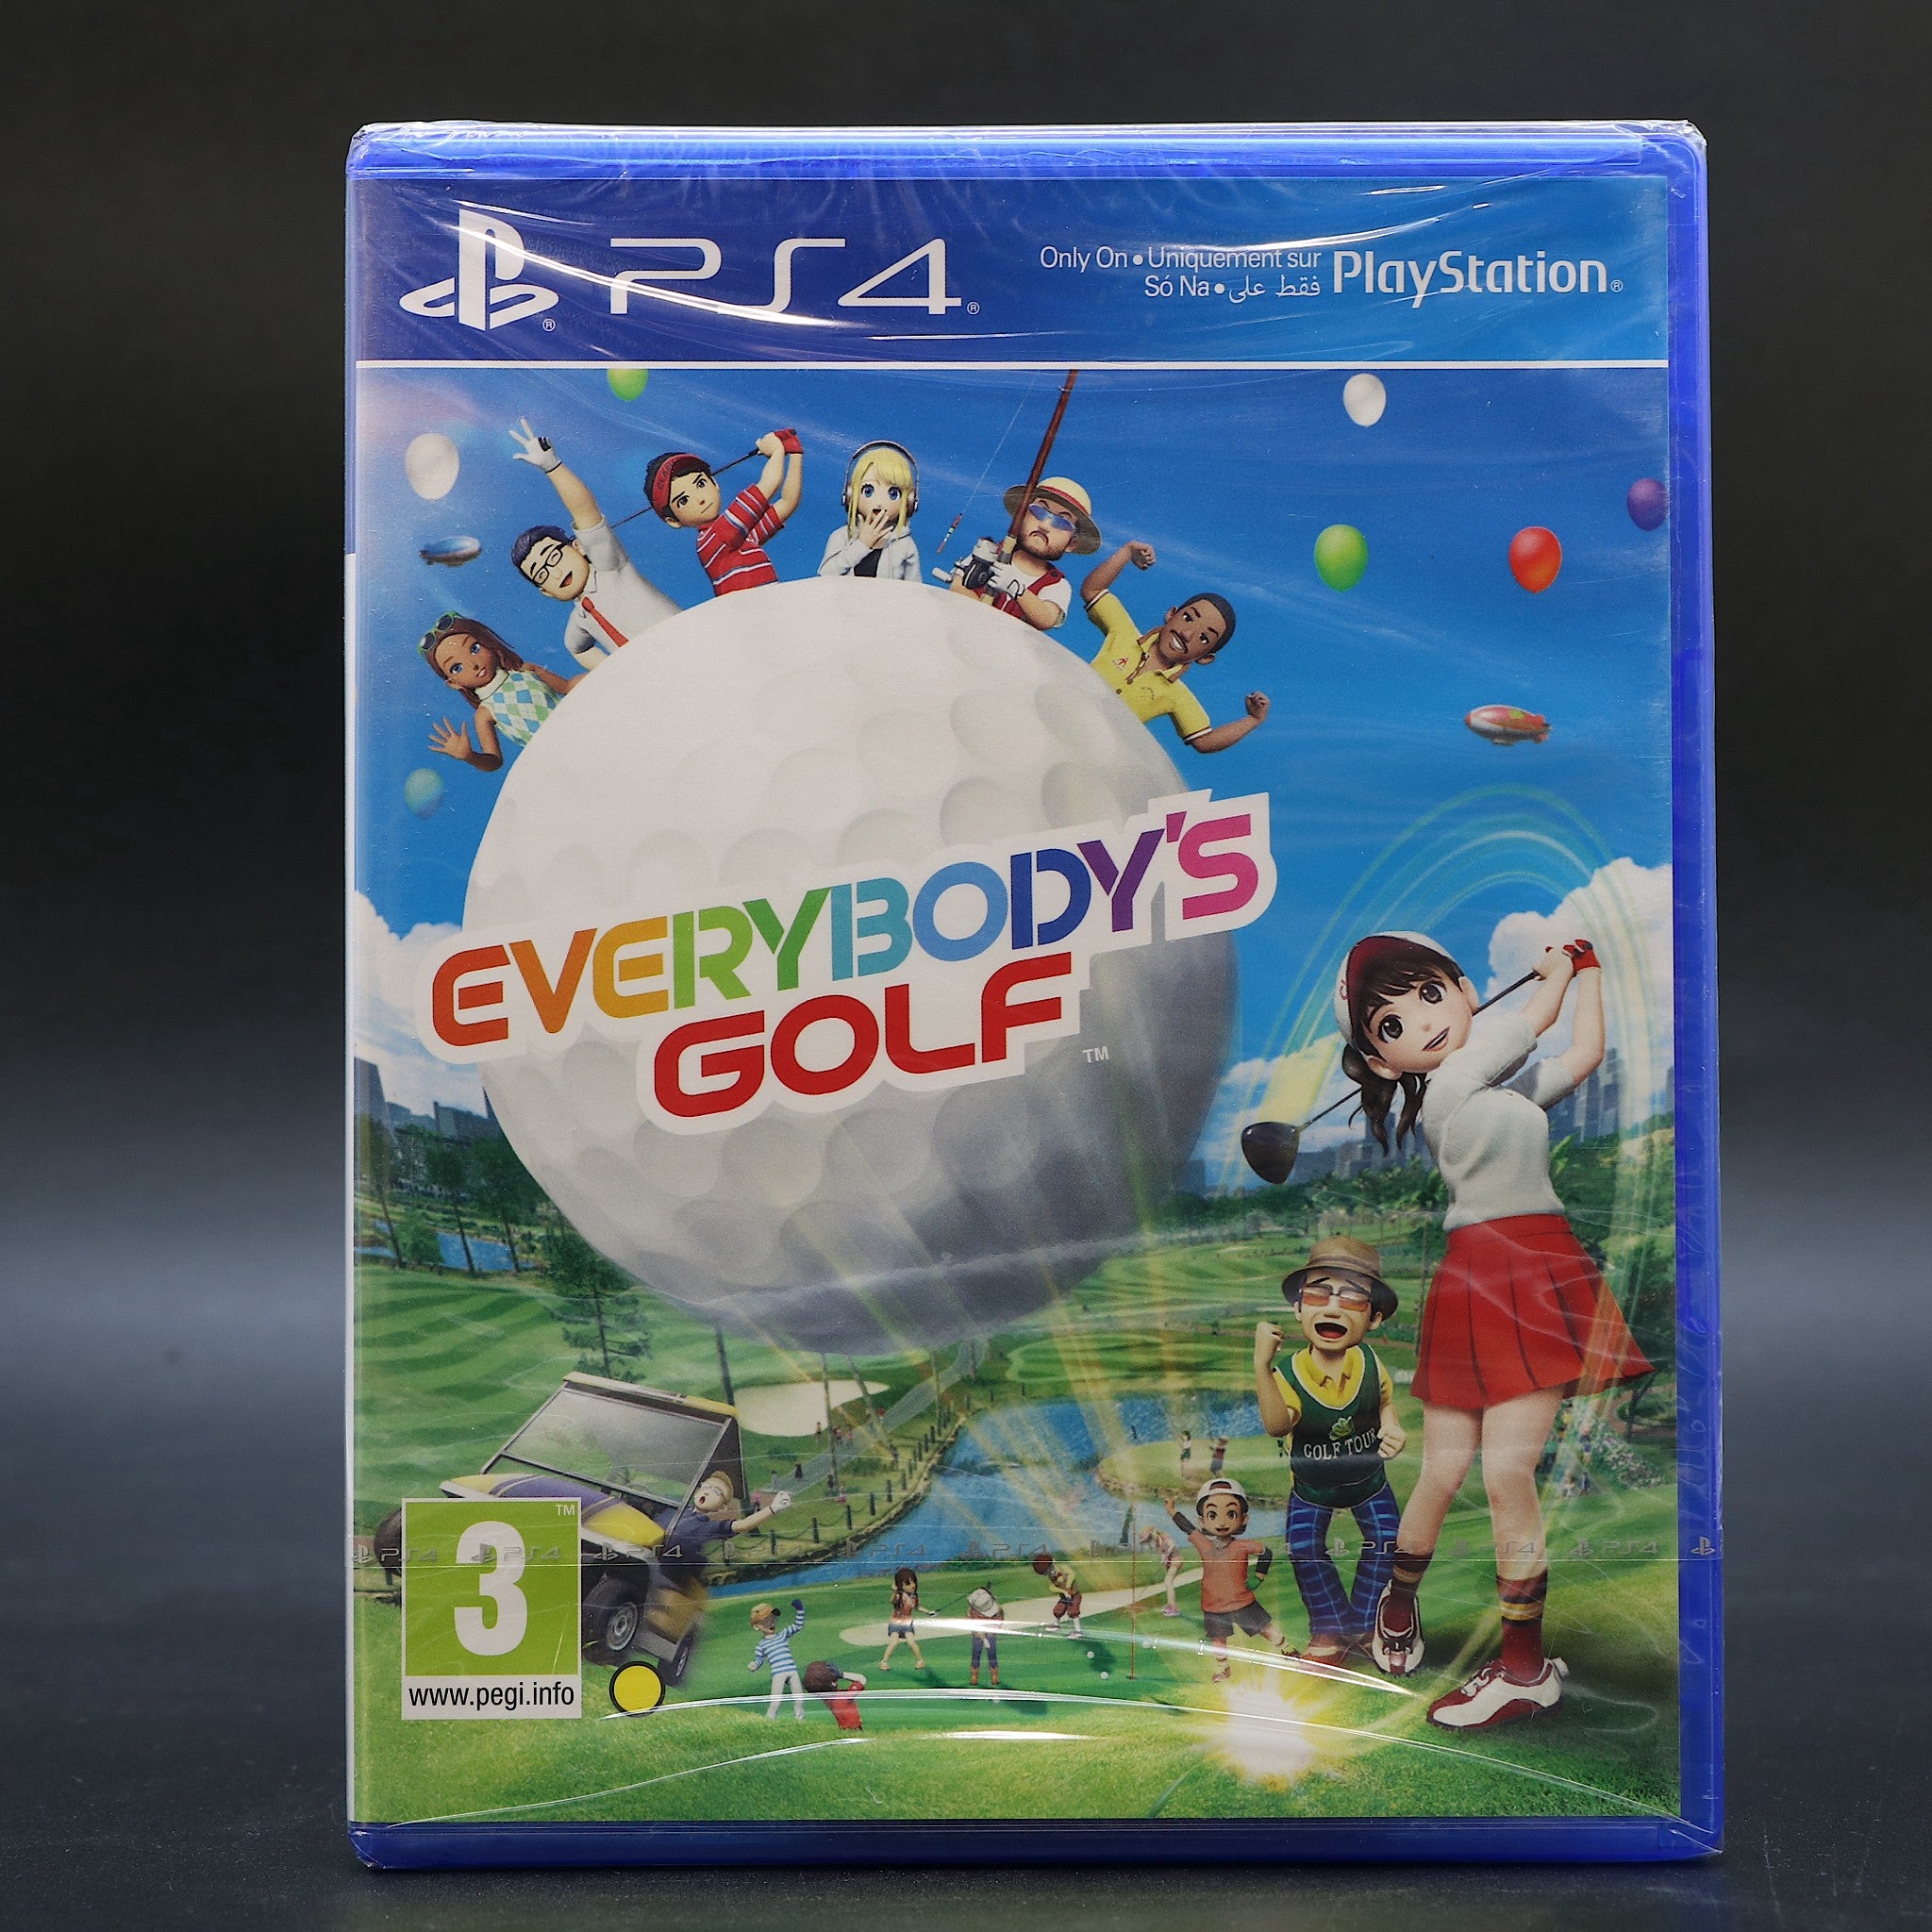 Everybody's Golf | Sony Playstation PS4 Game | New & Sealed!